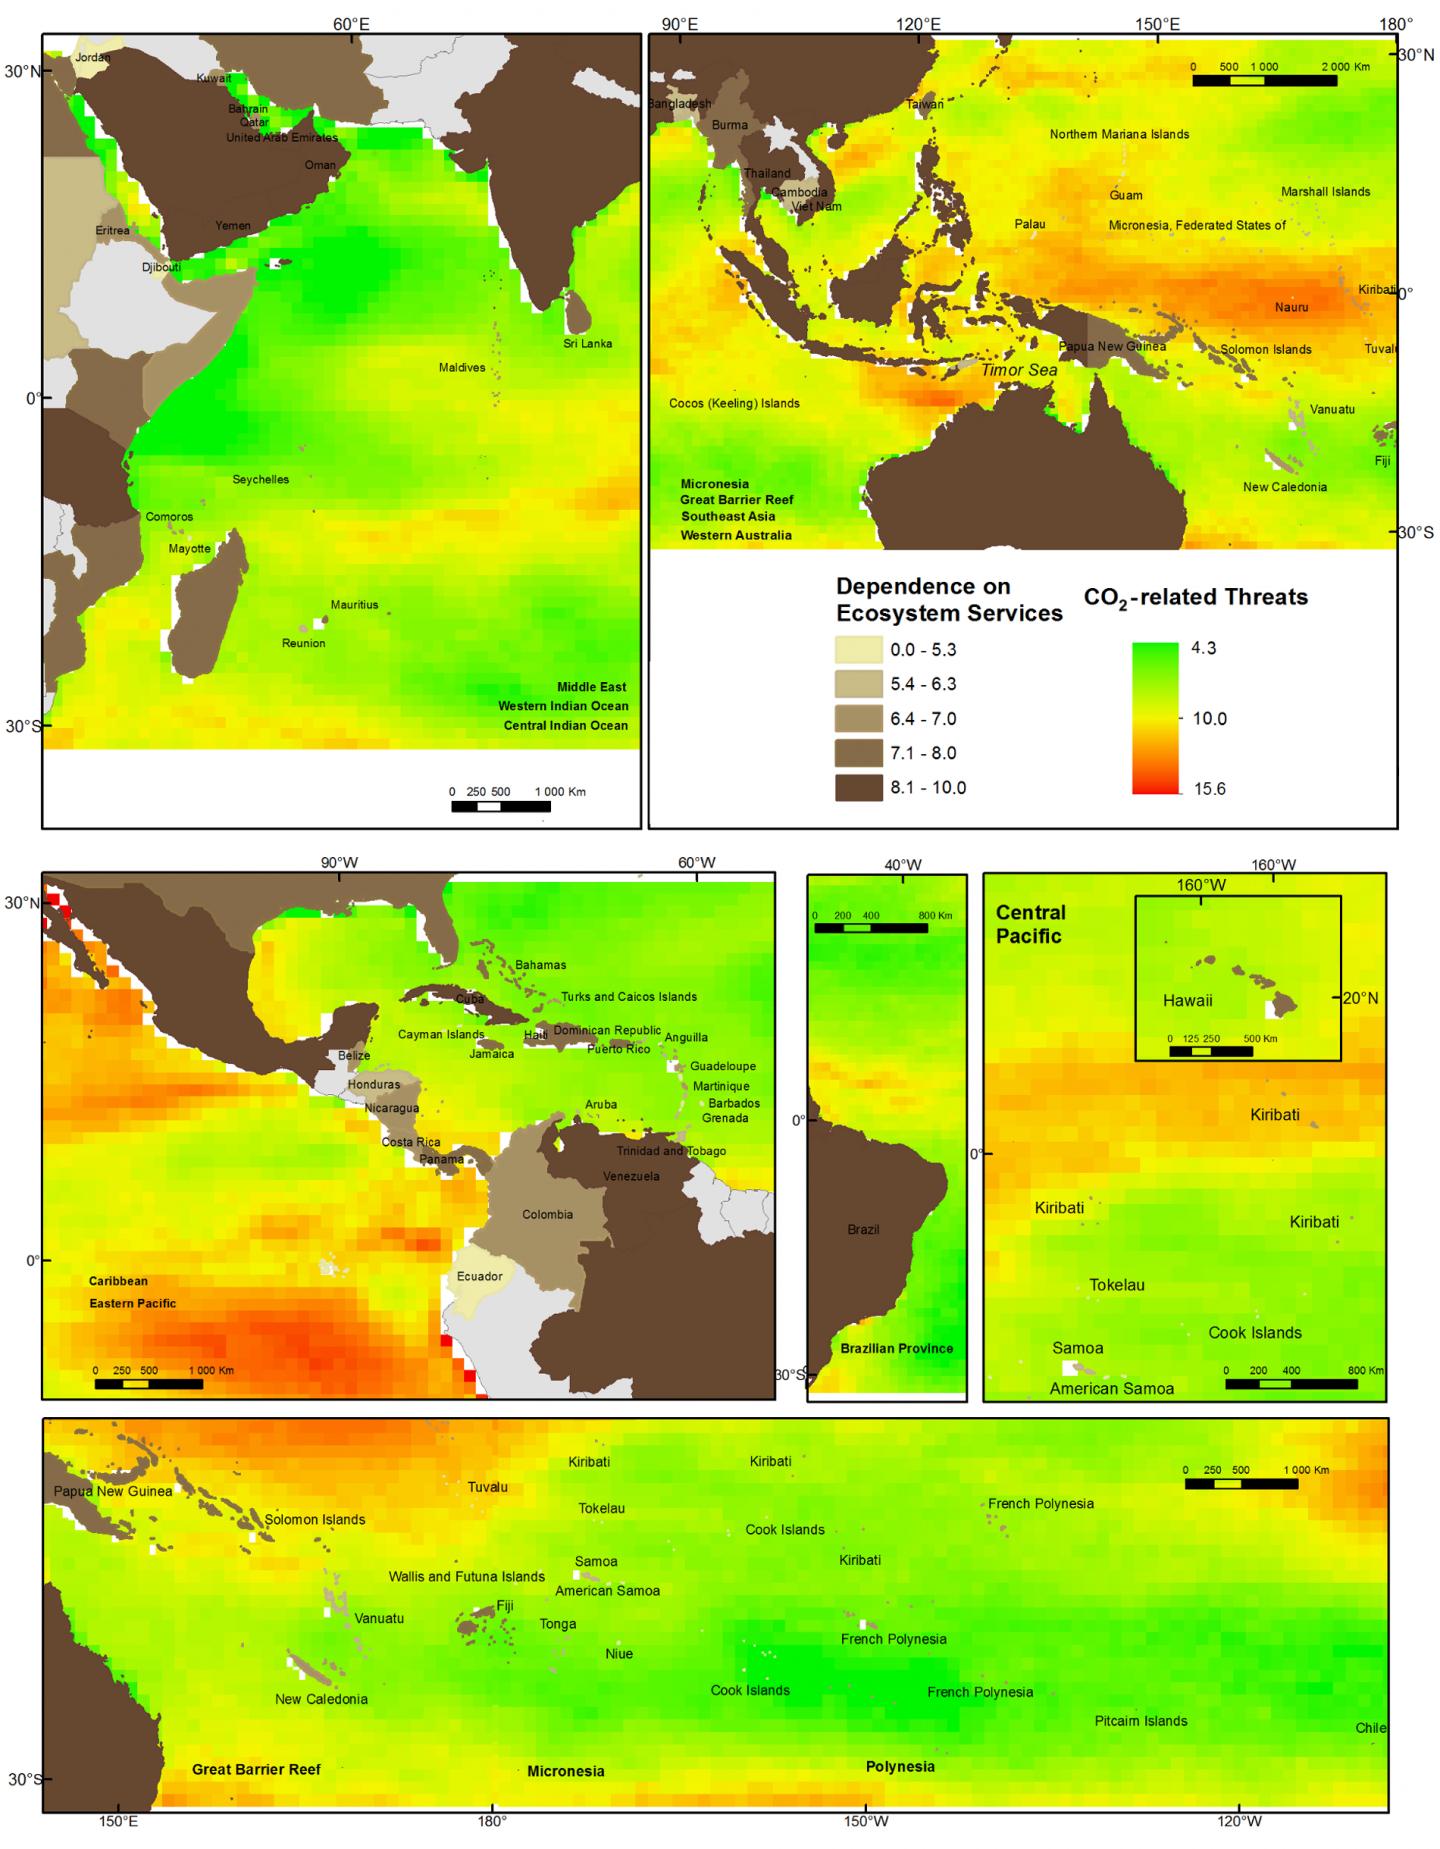 Coral Reefs and Communities Who Depend on Them May Be Severely Affected by Rising CO2 Levels